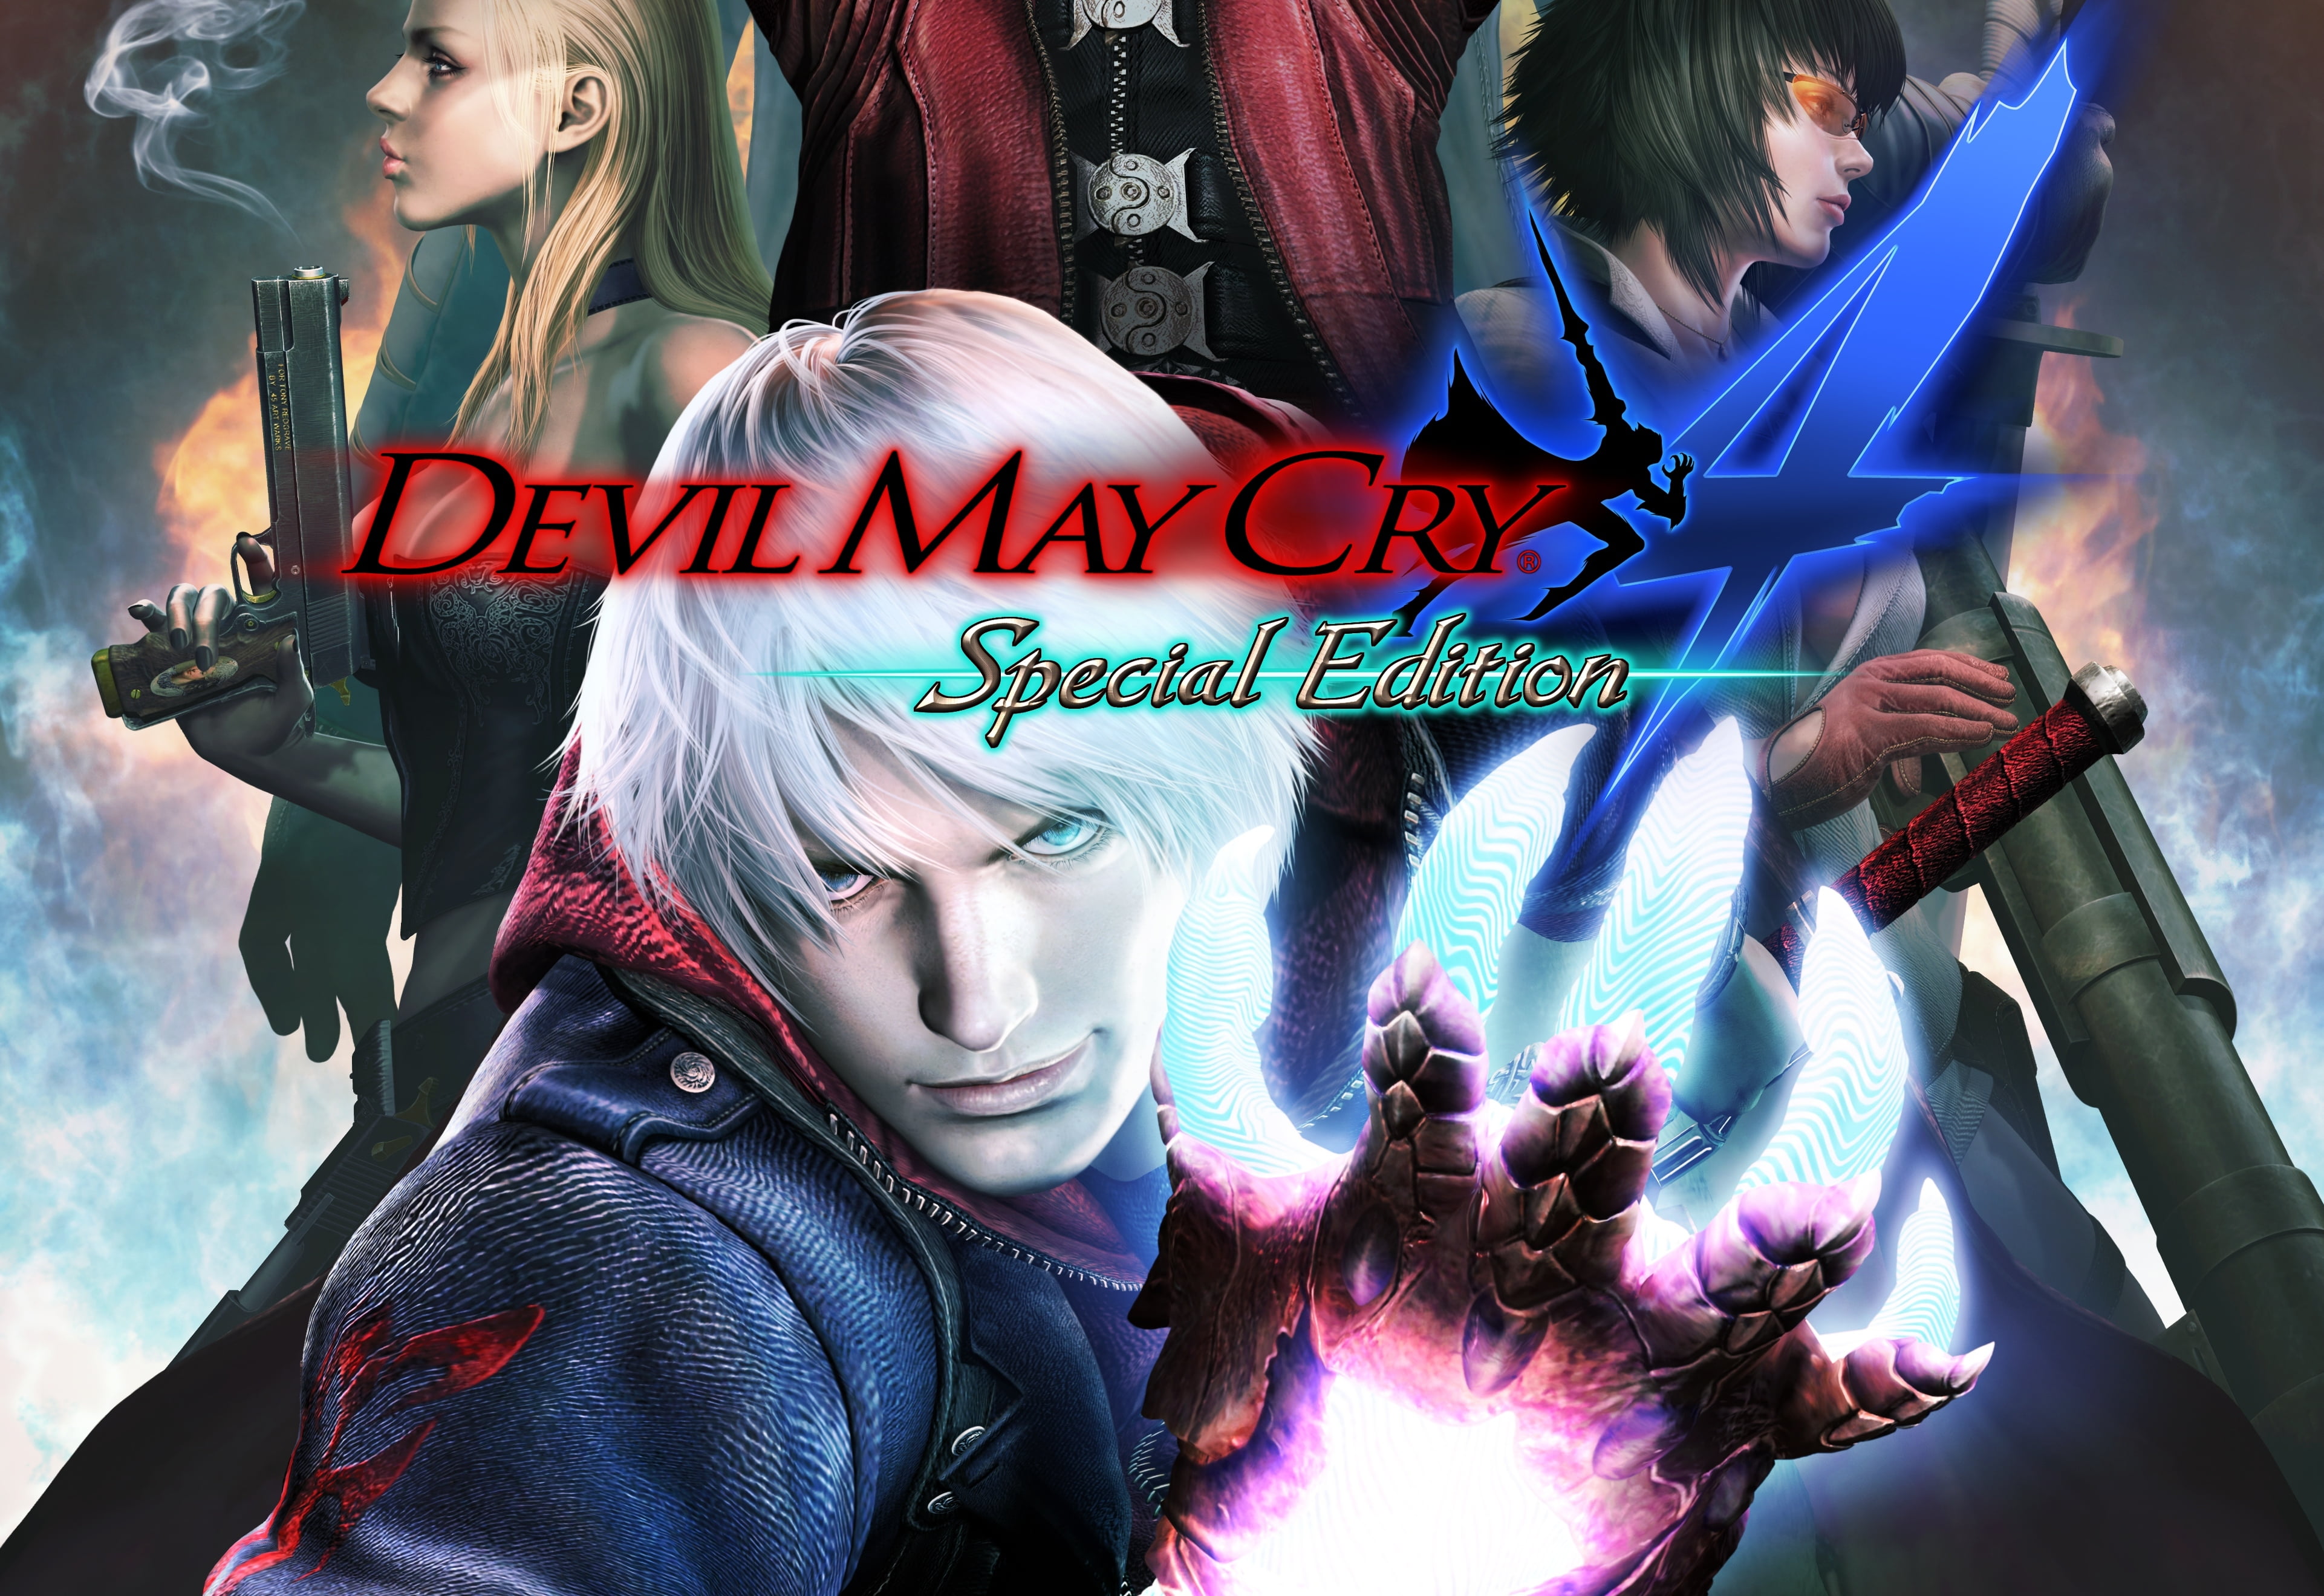 Devil May Cry special edition wallpaper, hand, guy, art, Nero